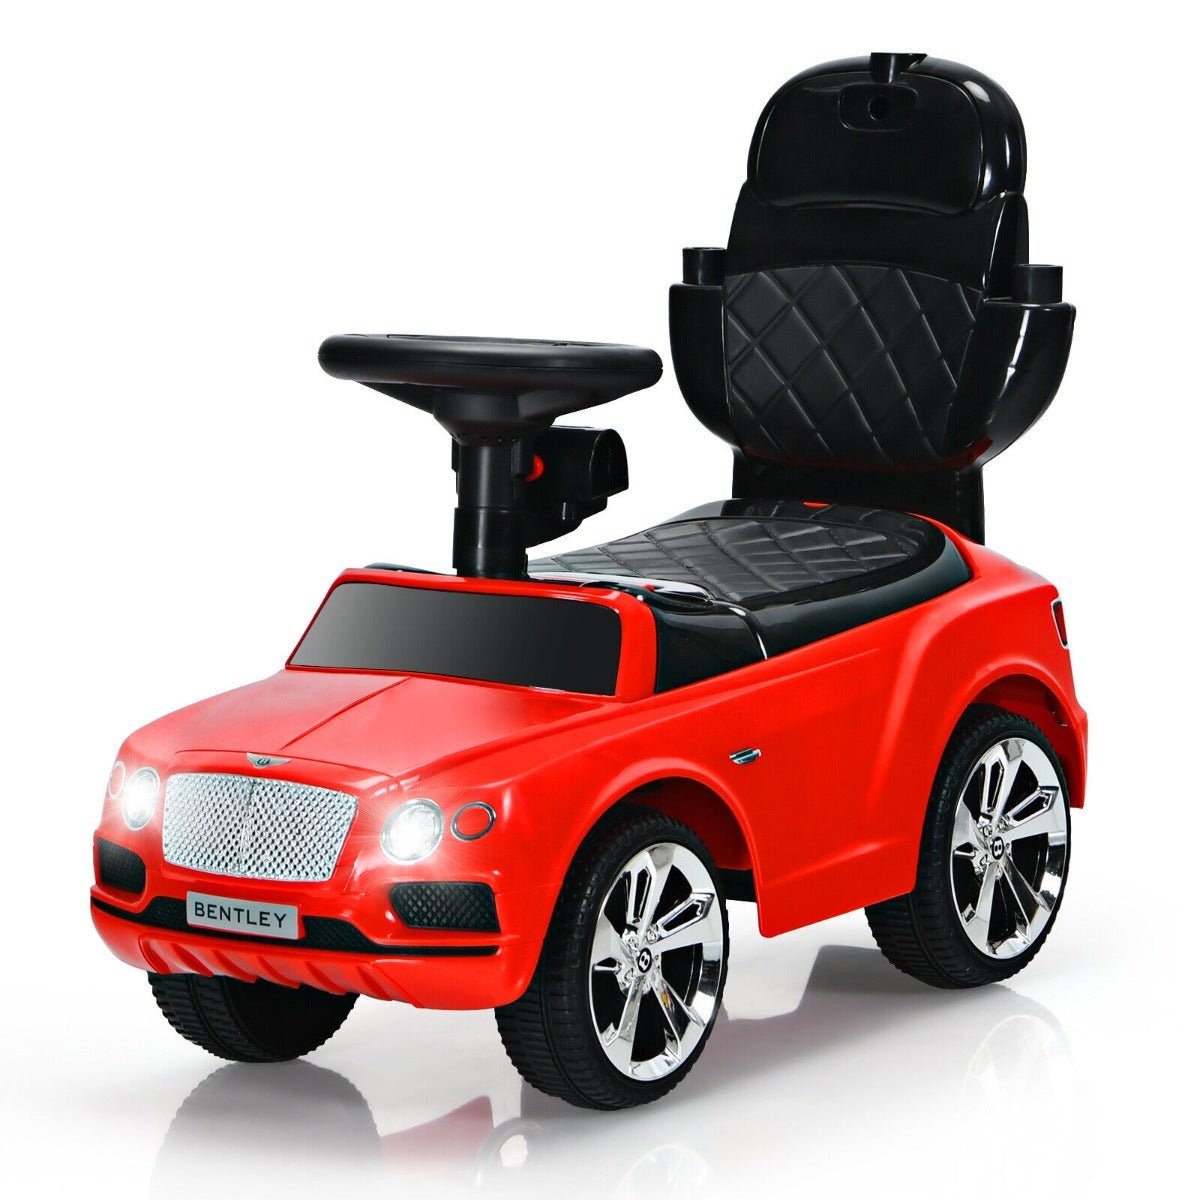 Licensed Bentley Ride On Push Car: Red colour, Canopy